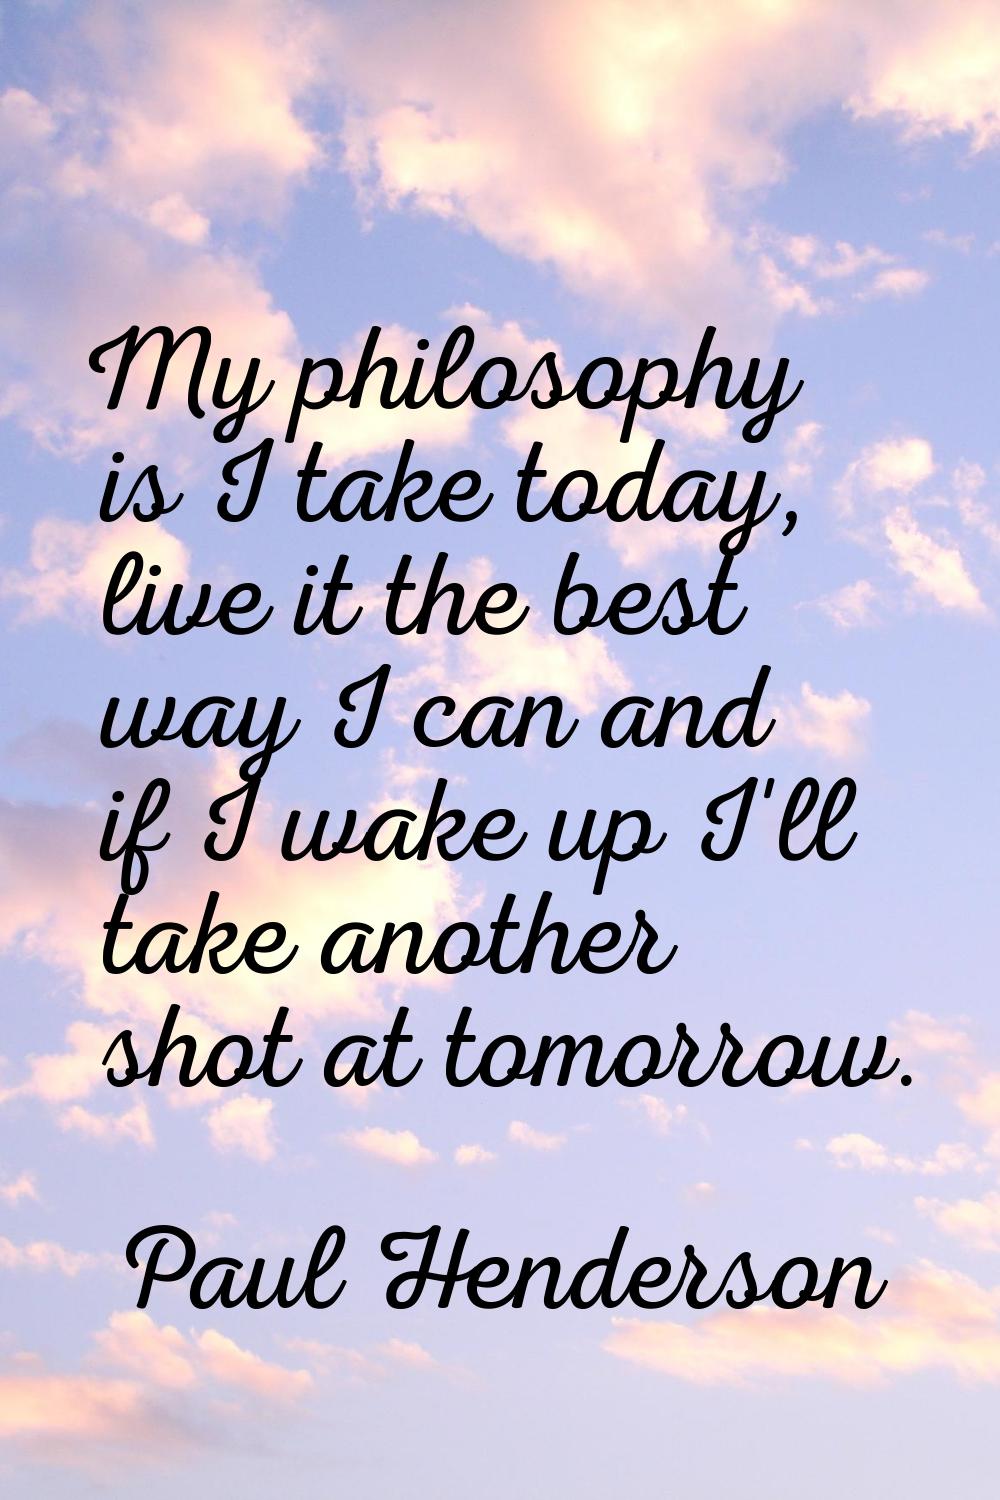 My philosophy is I take today, live it the best way I can and if I wake up I'll take another shot a